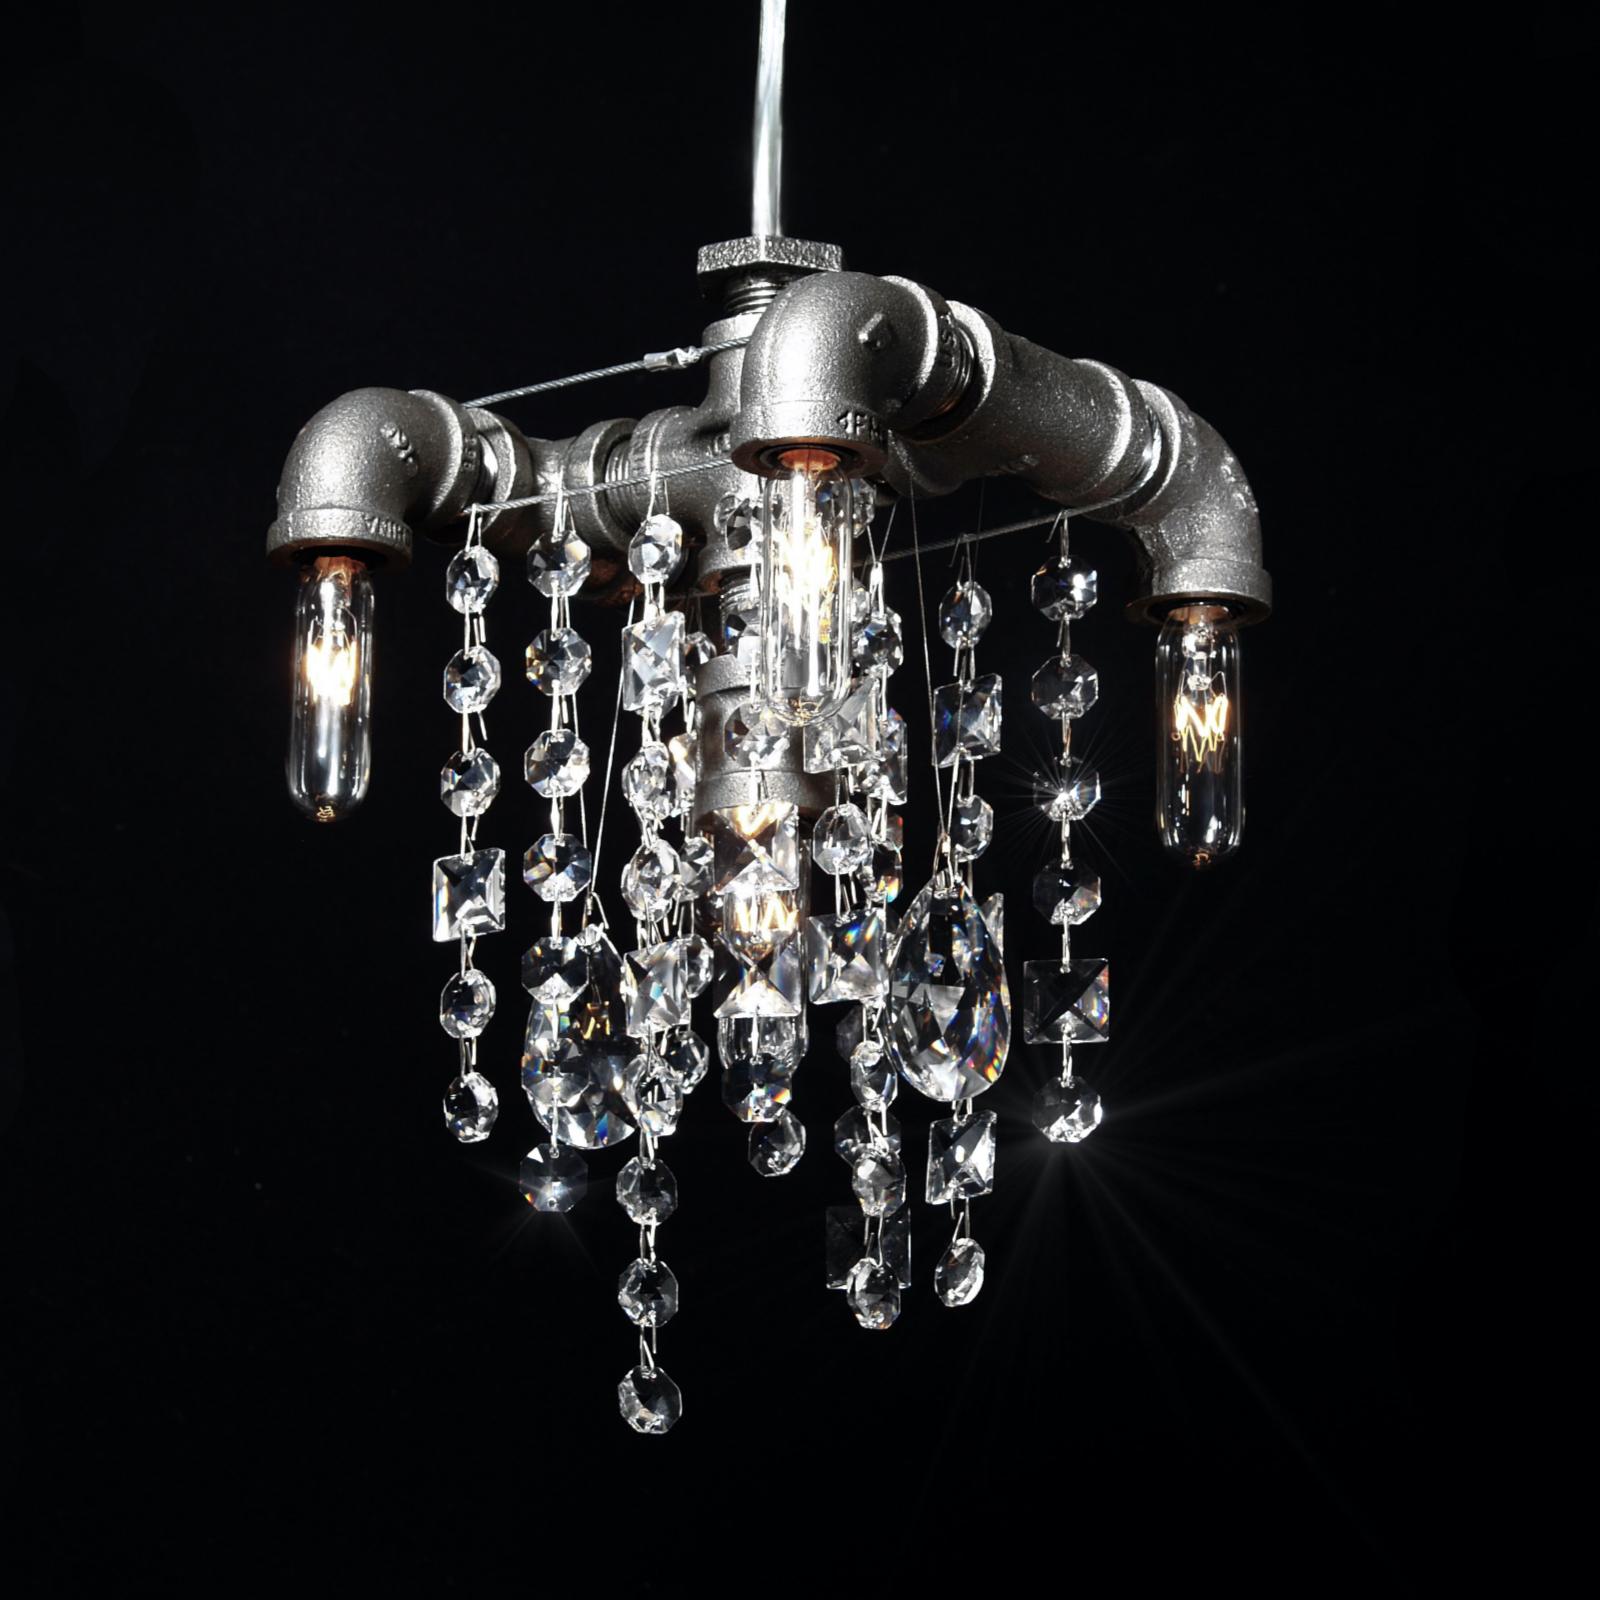 The 5-bulb Tribeca compact chandelier pendant features a compact Industrial frame of sturdy black steel gas pipes and fittings. With five lights cascading over two levels, paired with superior quality and optically-pure gem-cut crystal in a random